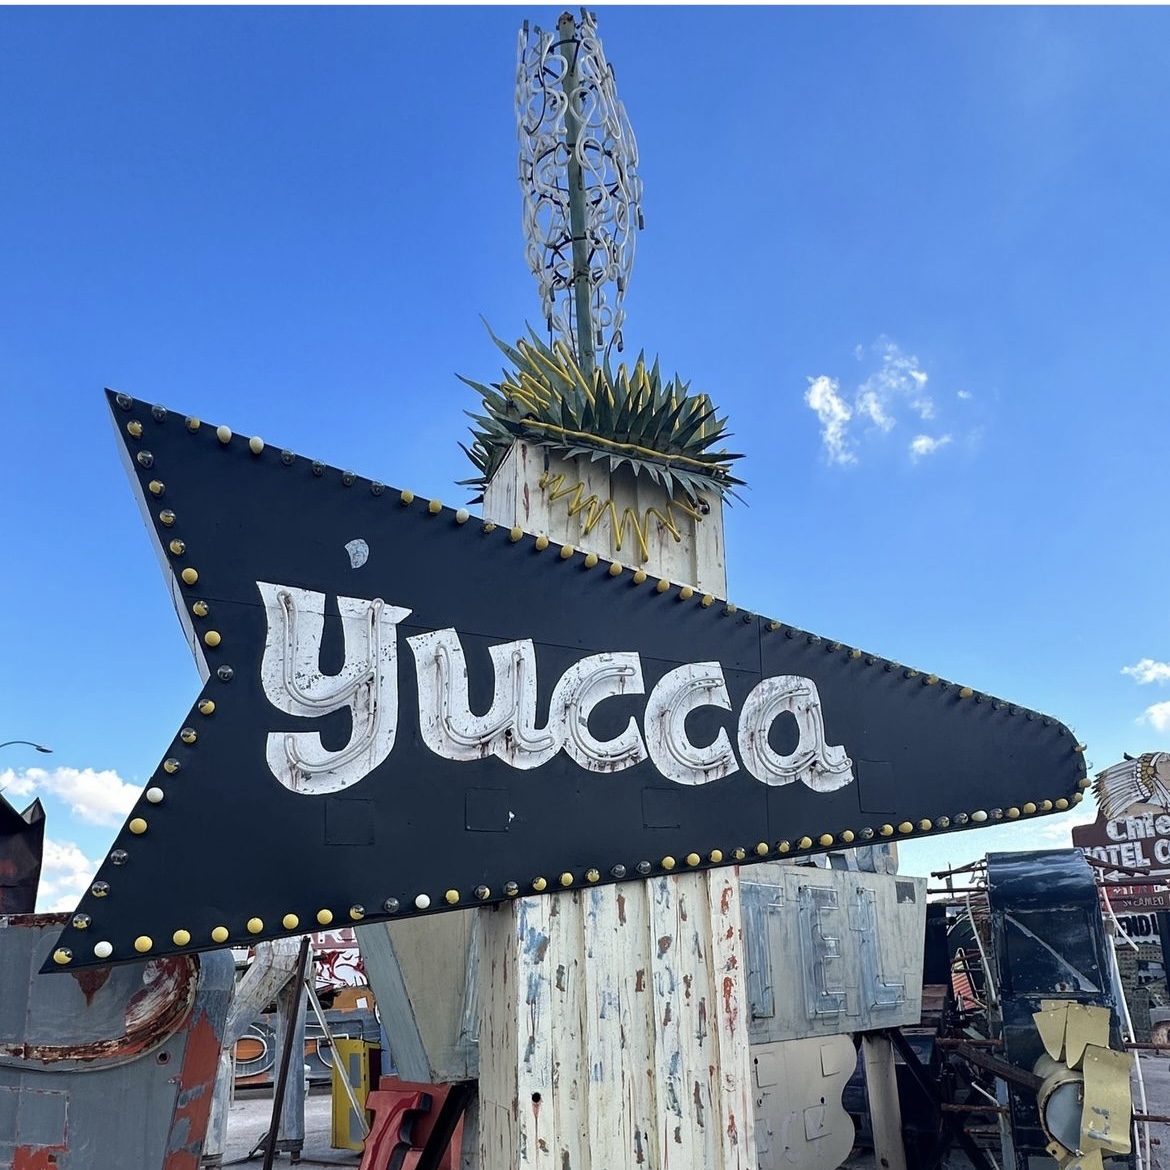 Accounts We HEART a lot! ❤️ Today’s local shoutout goes to The Neon Museum! 💡An iconic landmark among locals and tourists, the Neon Museum is the perfect place for everyone in the family. 📸 

#VisitLasVegas #NeonMuseumLasVegas #LasVegasMuseum #LasVegasBusiness #SpitfireSocial